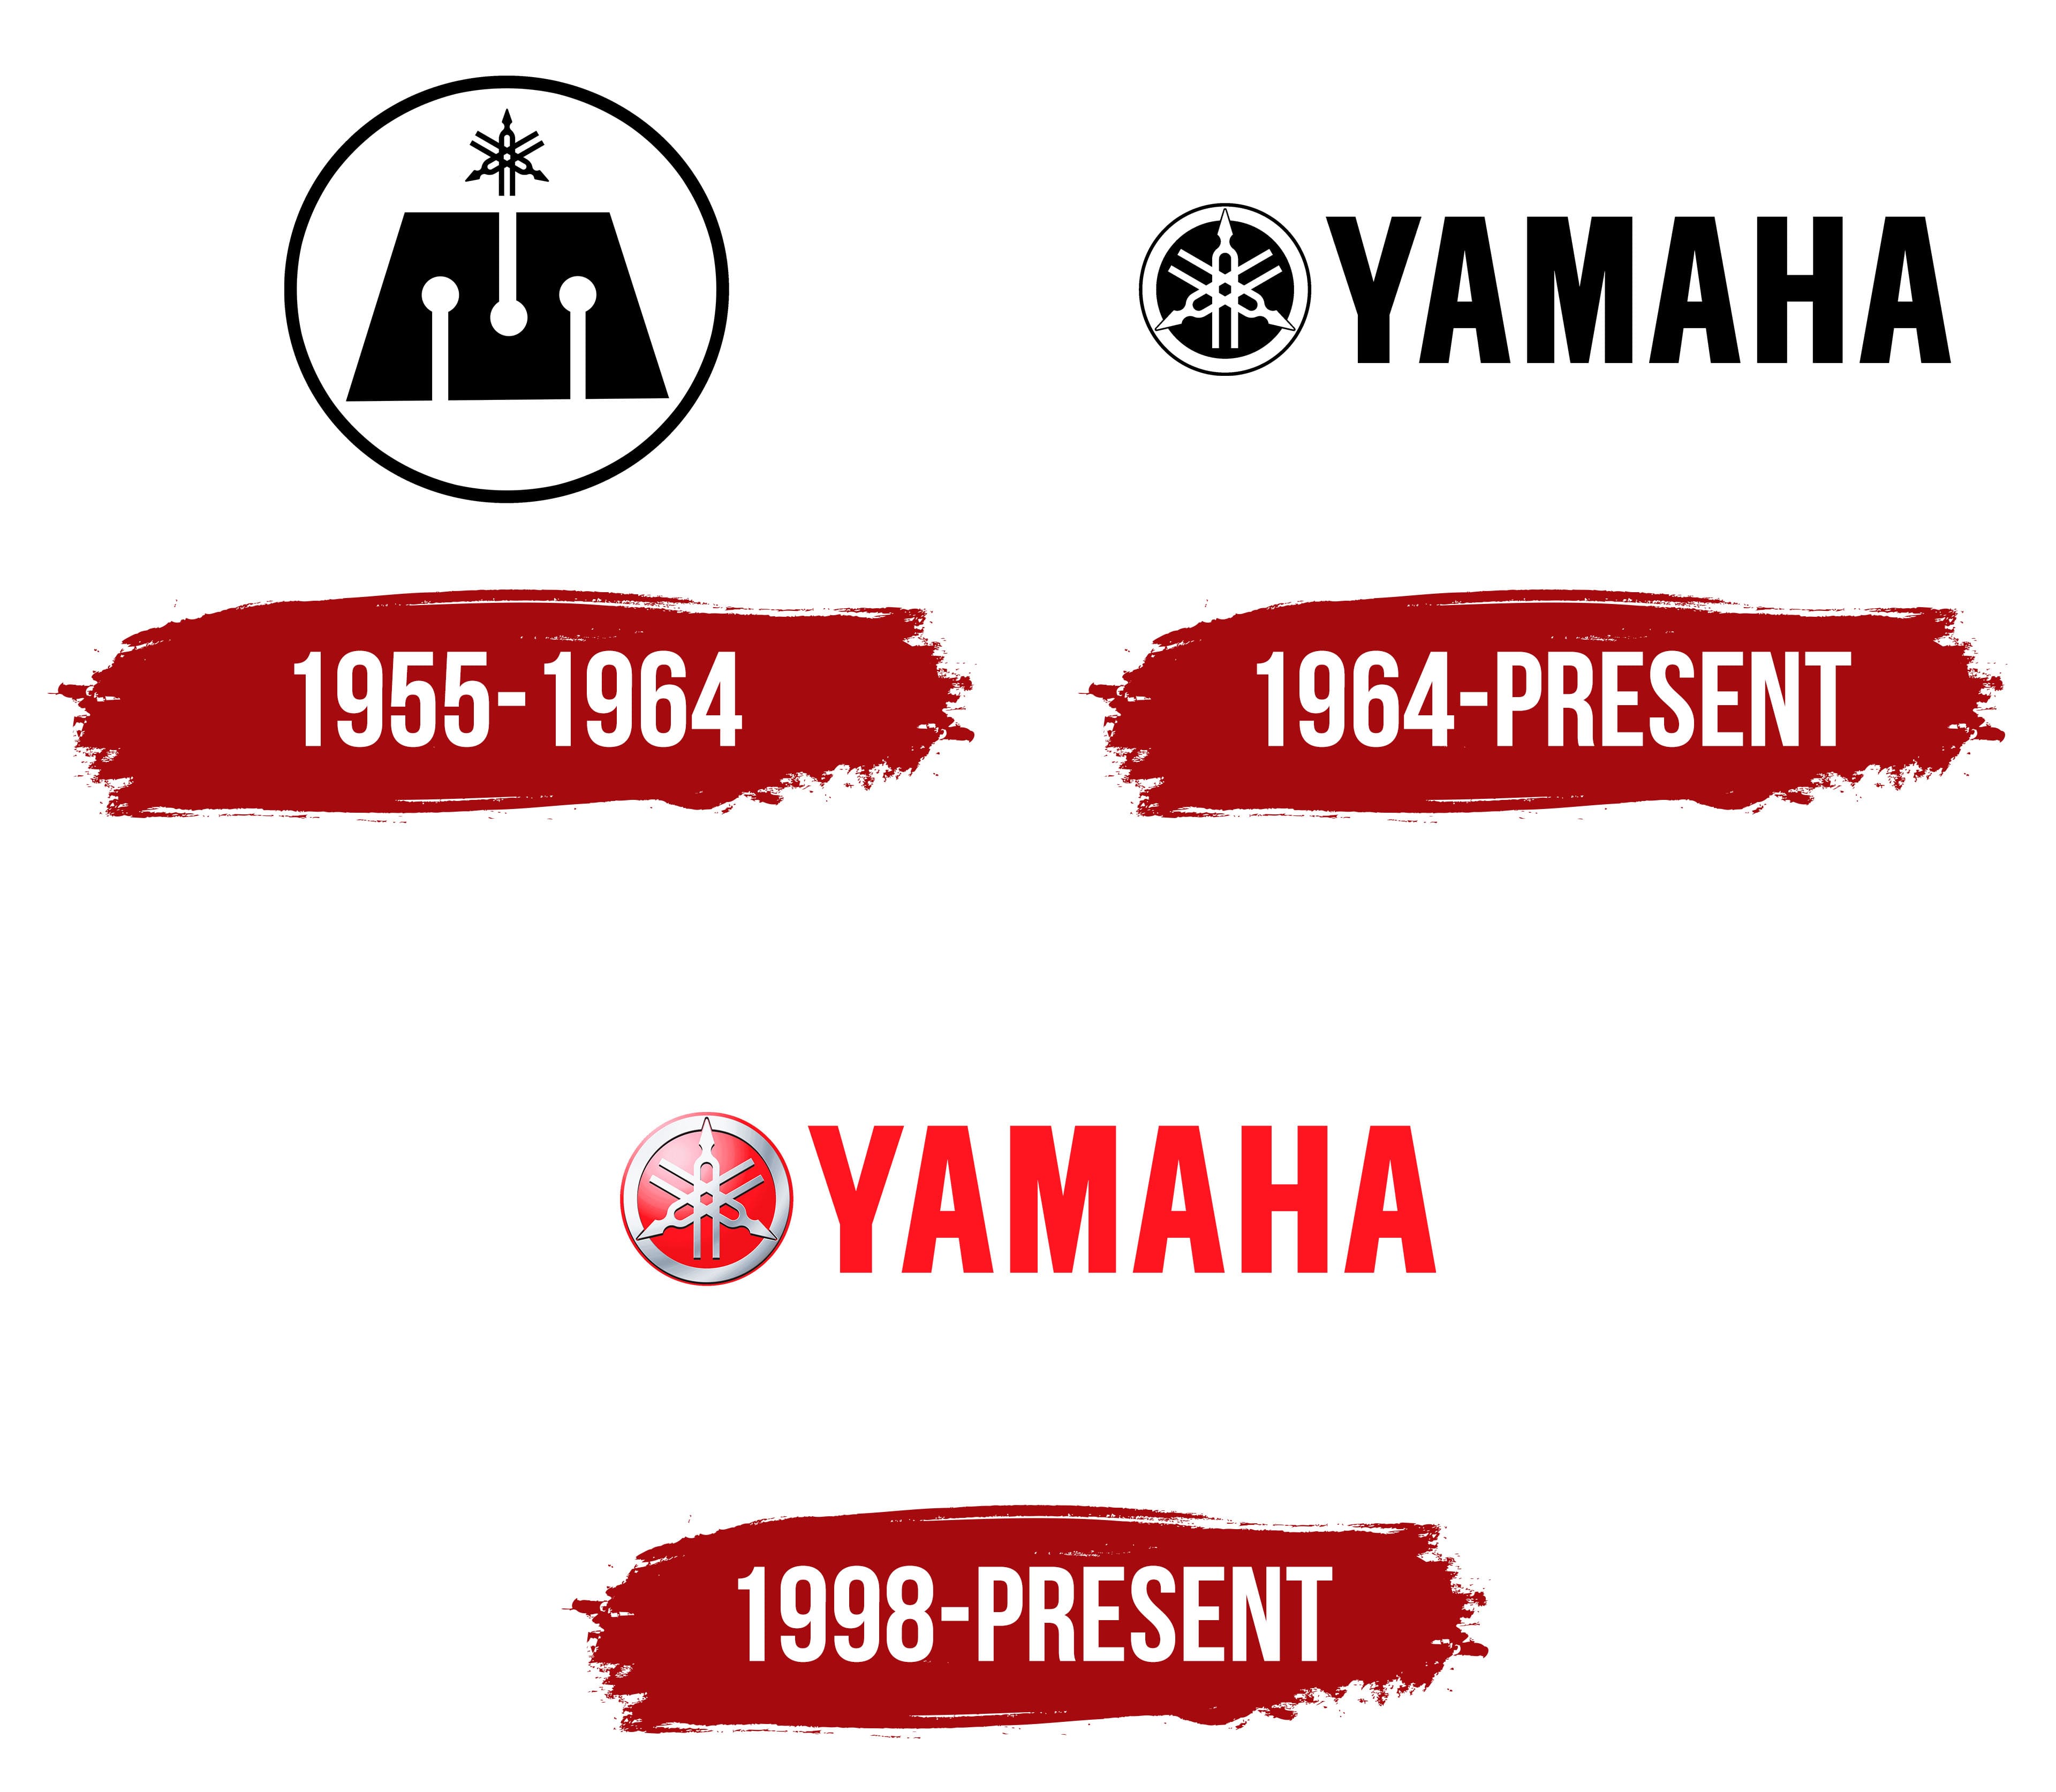 Yamaha Logo Selection 001 - Vinyl Sticker (For Laptop, Motorcycle, Car,  Etc.) Outdoor Decal | Shopee Philippines